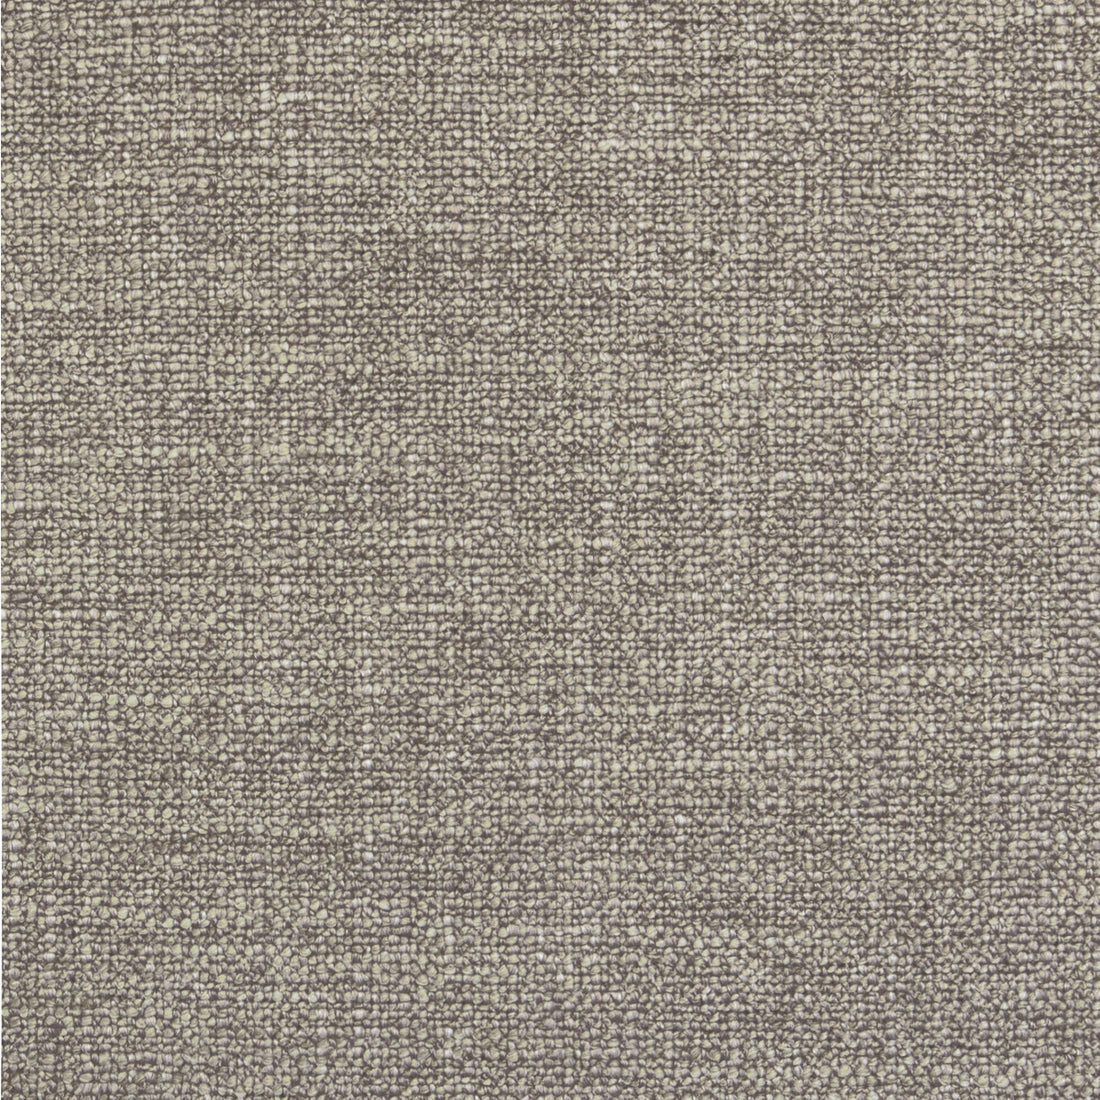 Hapi Texture fabric in pinkberry color - pattern 35872.17.0 - by Kravet Couture in the Windsor Smith Naila collection